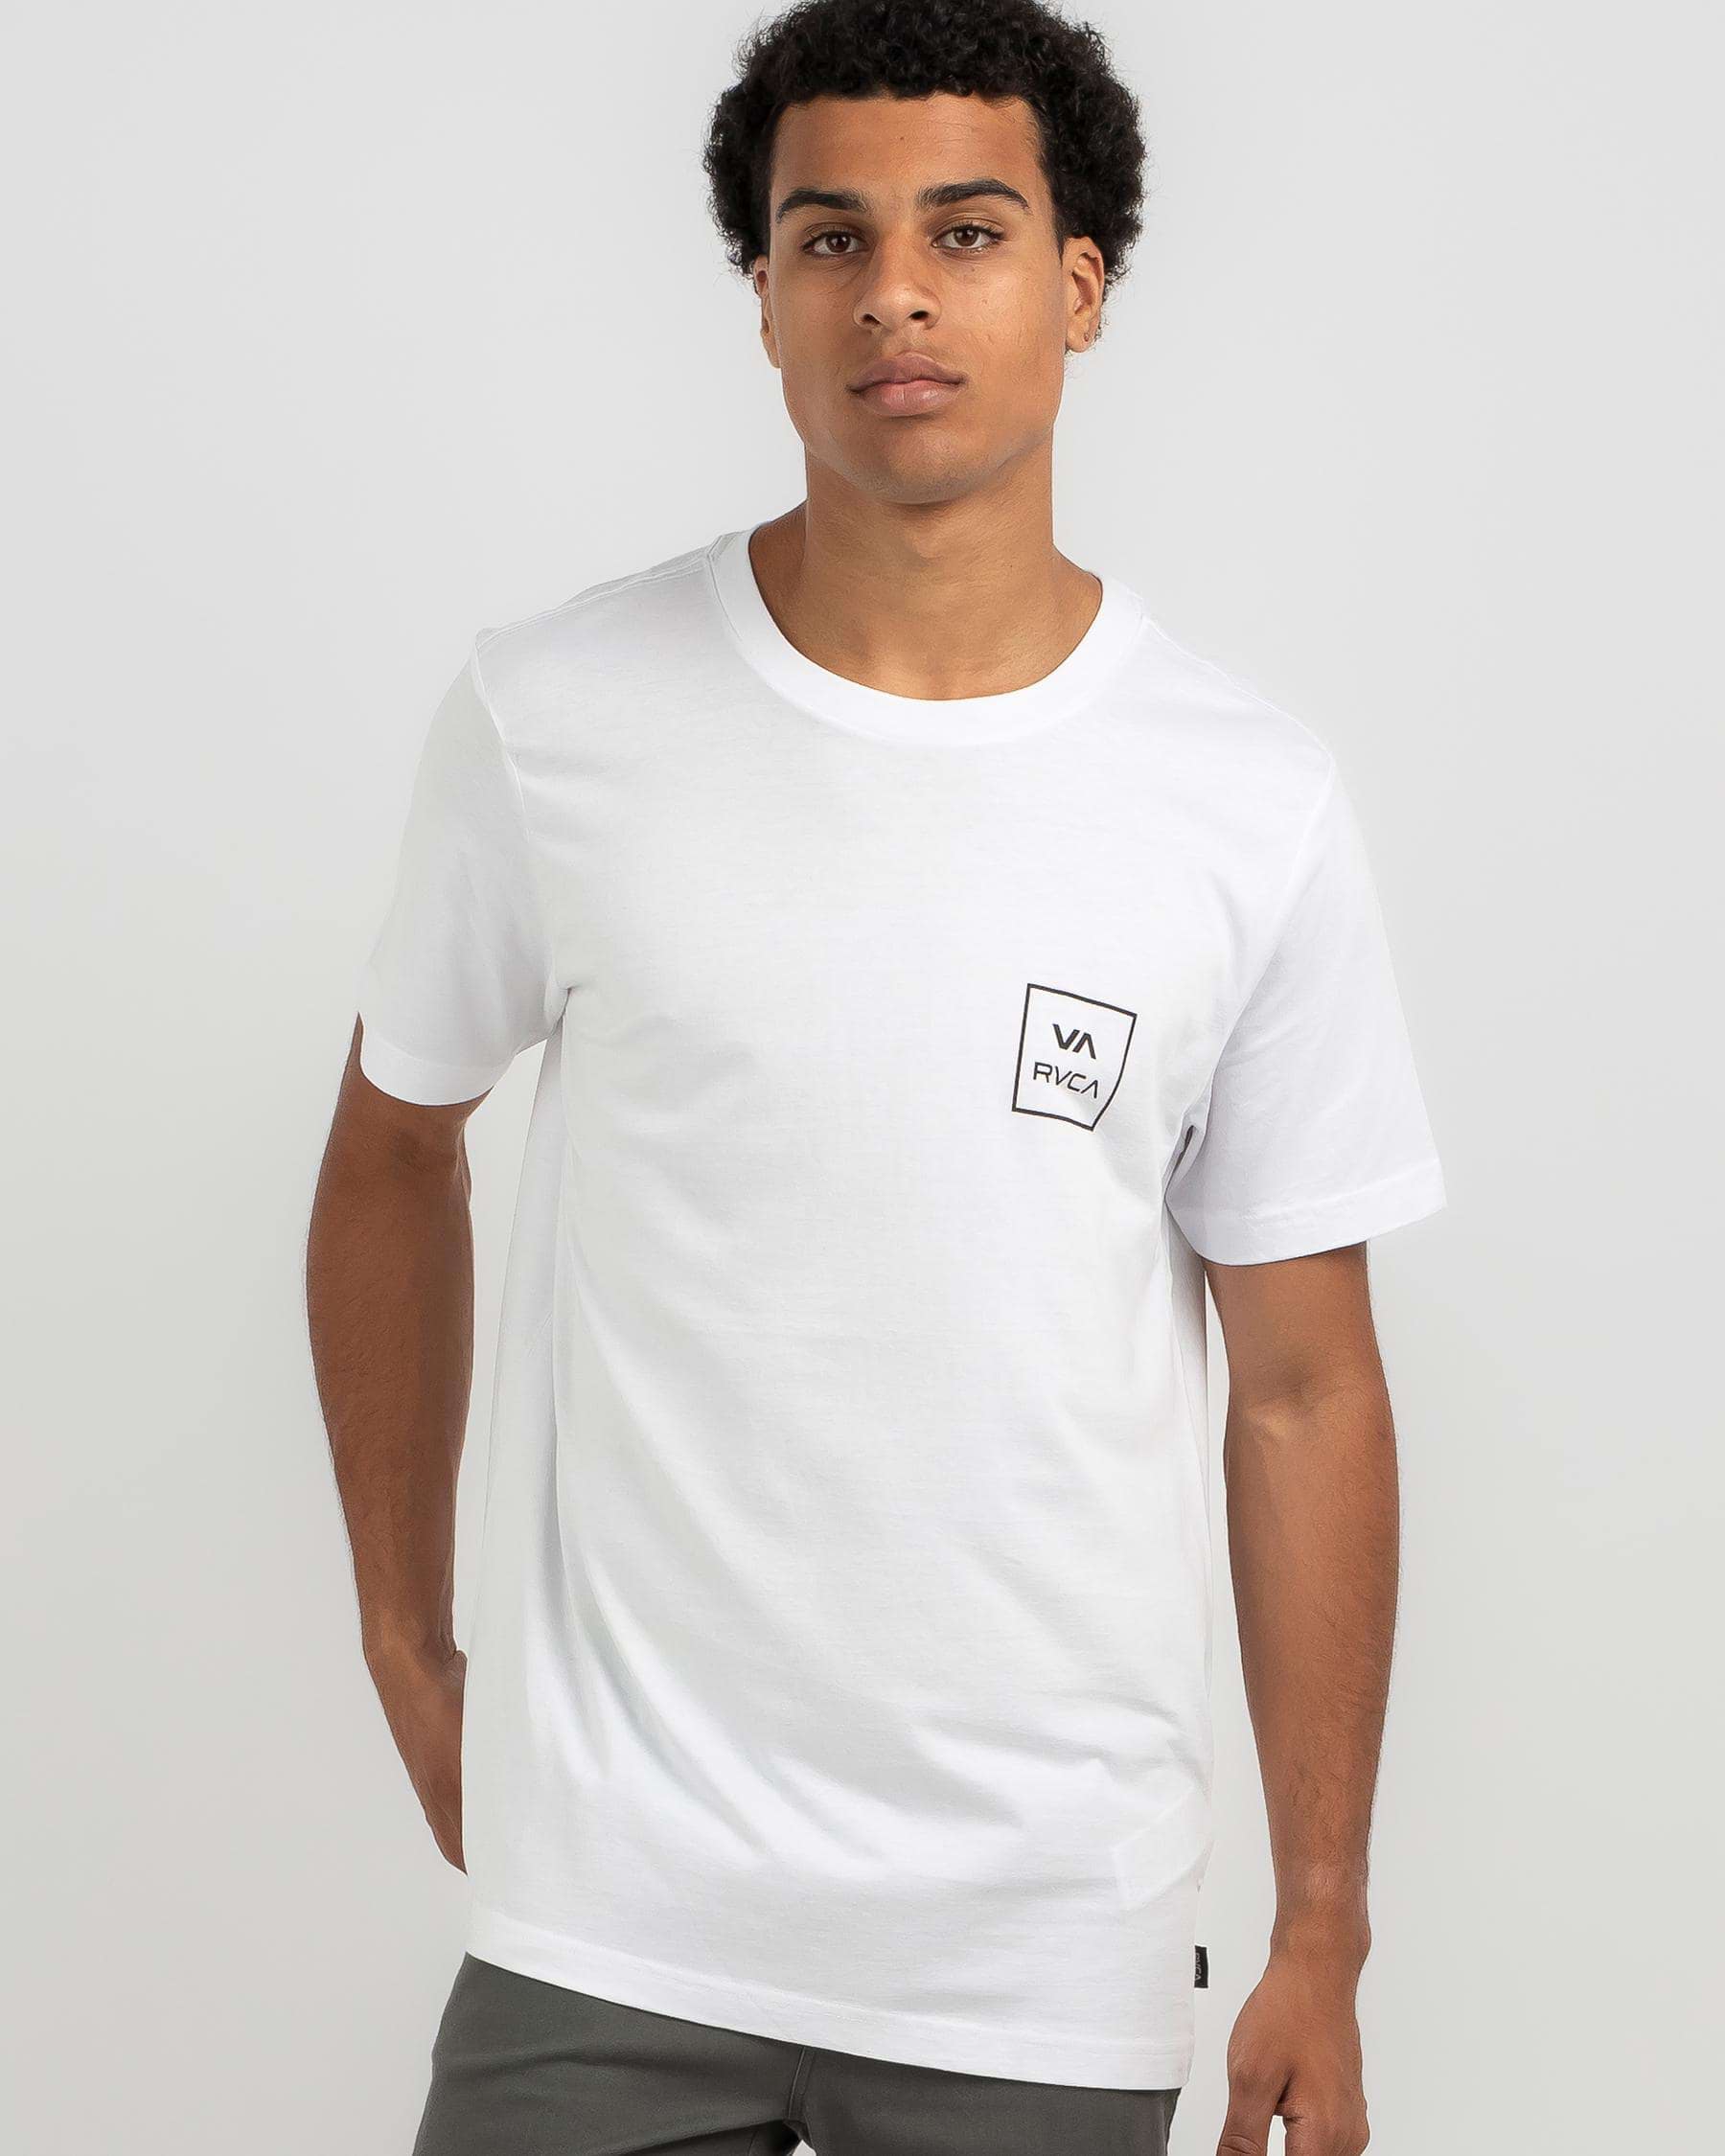 Shop RVCA VA All The Ways T-Shirt In White - Fast Shipping & Easy ...